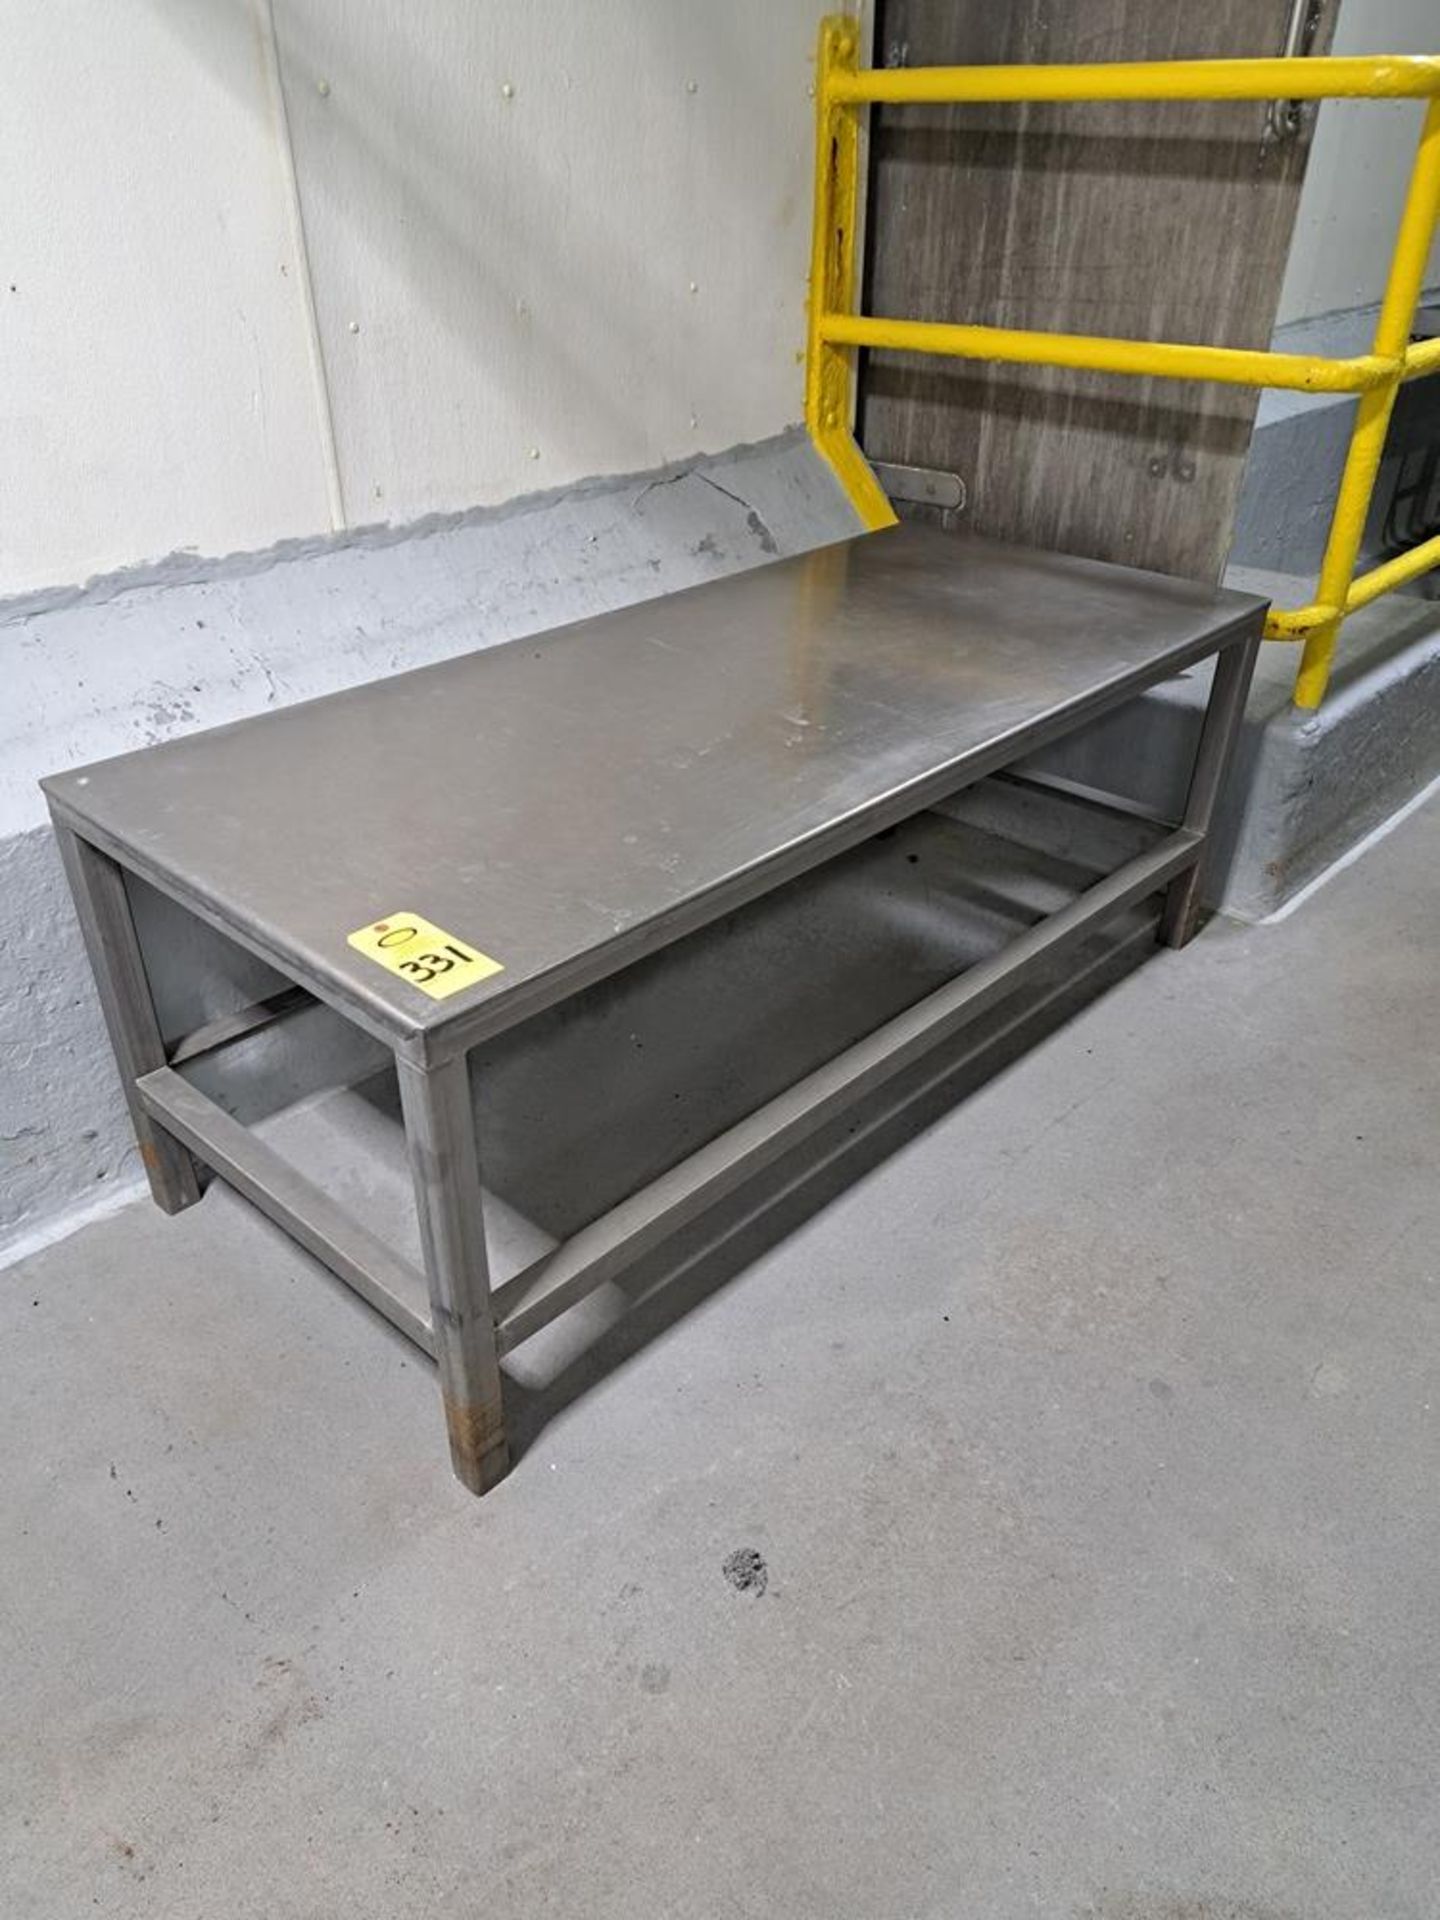 Stainless Steel Table, 30" W X 70" L X 27" T: Required Loading Fee $50.00, Rigger-Norm Pavlish,